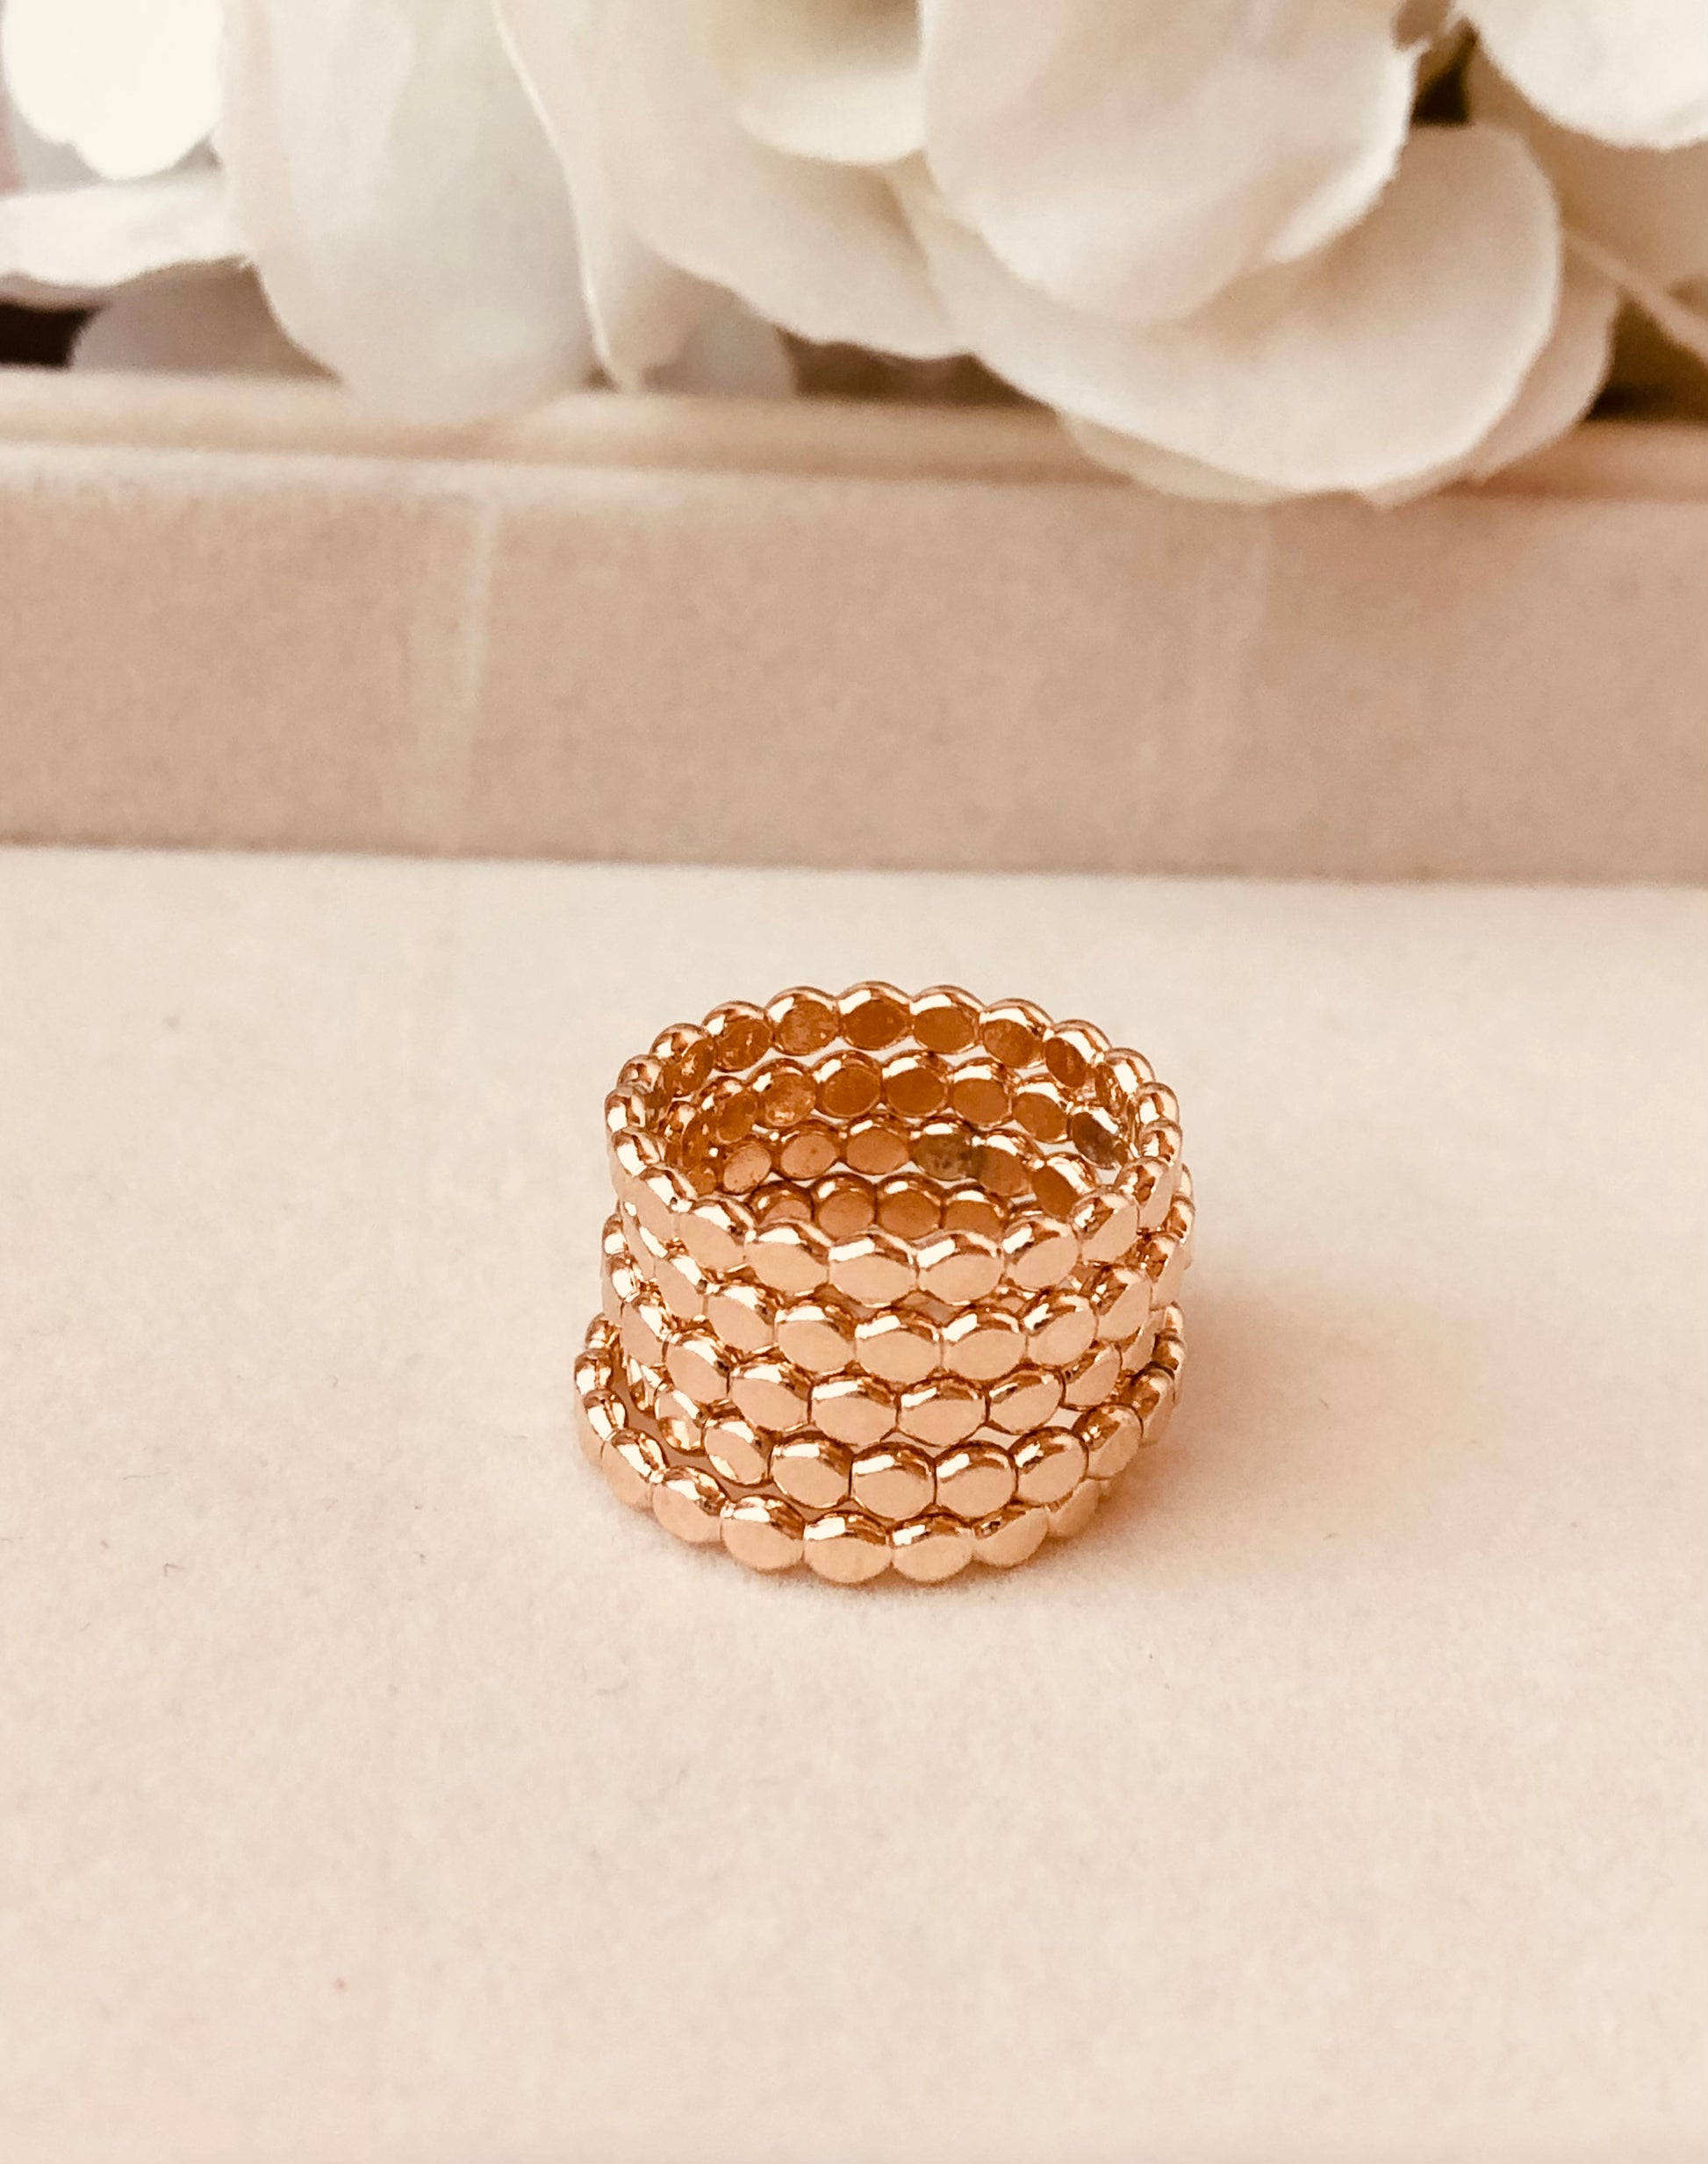 Gold Hammered Beaded Ring, Gold Dot Stacking Ring, Gold Dot Ring, Hammered Beaded Band, Dainty Ring, Stacking Ring, Gift For Her, Gift Ideas, Office Outfit, Delicate Jewelry, Mothers Gift, Coco Wagner Jewelry, Gift For Her, Gift Ideas,  Birthday Gift, Mothers Gift, Christmas Gift Ideas, Mothers Day Gift  Minimalist Jewelry, Everyday Jewelry, Simple and Dainty